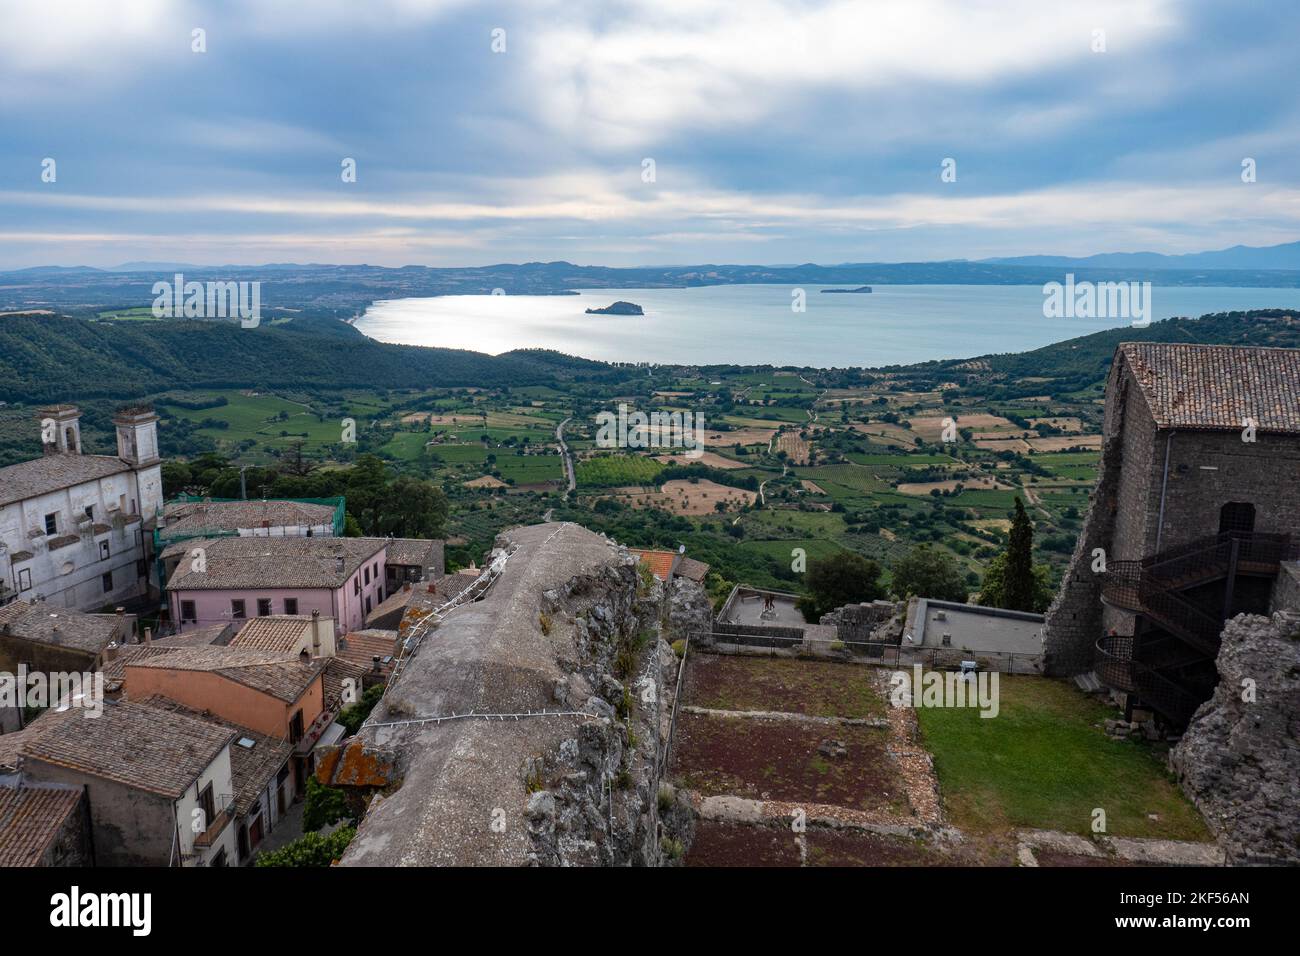 Landscape from the top of the tower of the castle of Montefiascone, Lazio, Italy, along via Francigena path Stock Photo